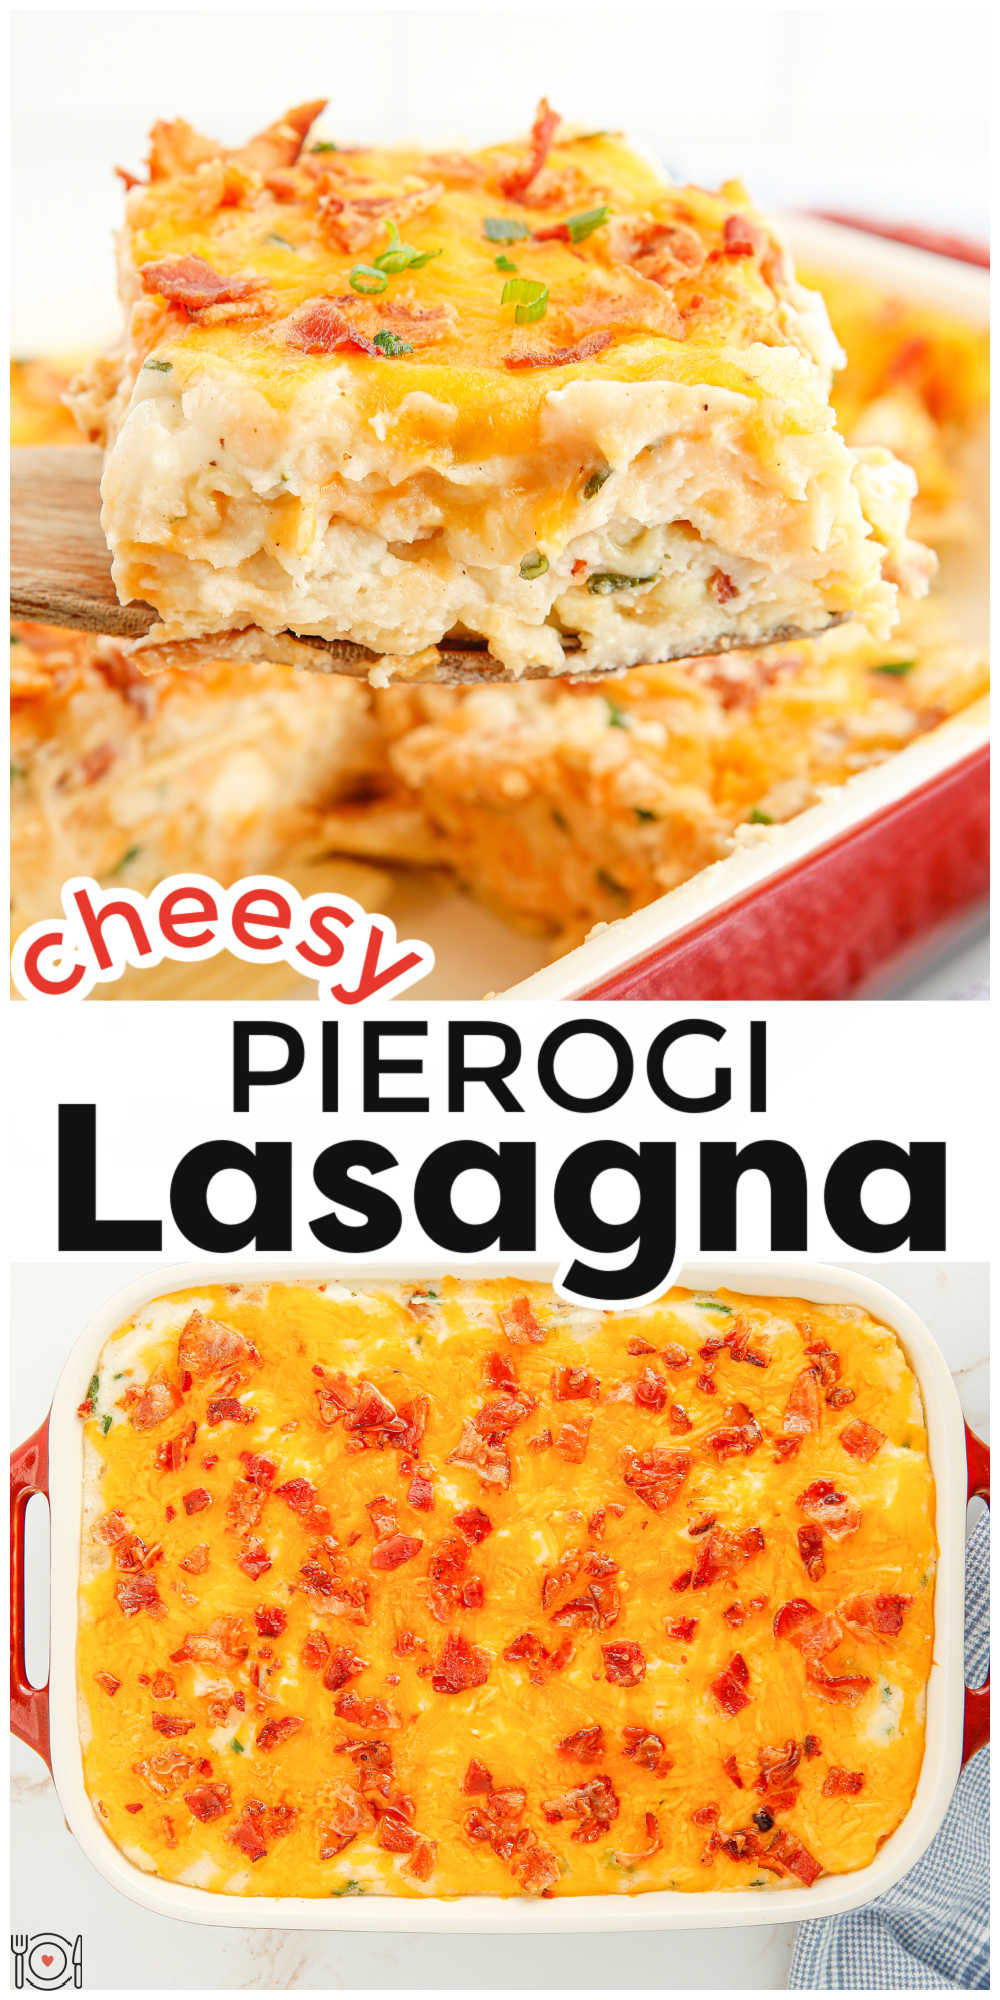 This Cheesy Pierogi Lasagna recipe with bacon and chives is everything you love in a pierogi but in the perfect potluck-friendly casserole. via @foodfolksandfun